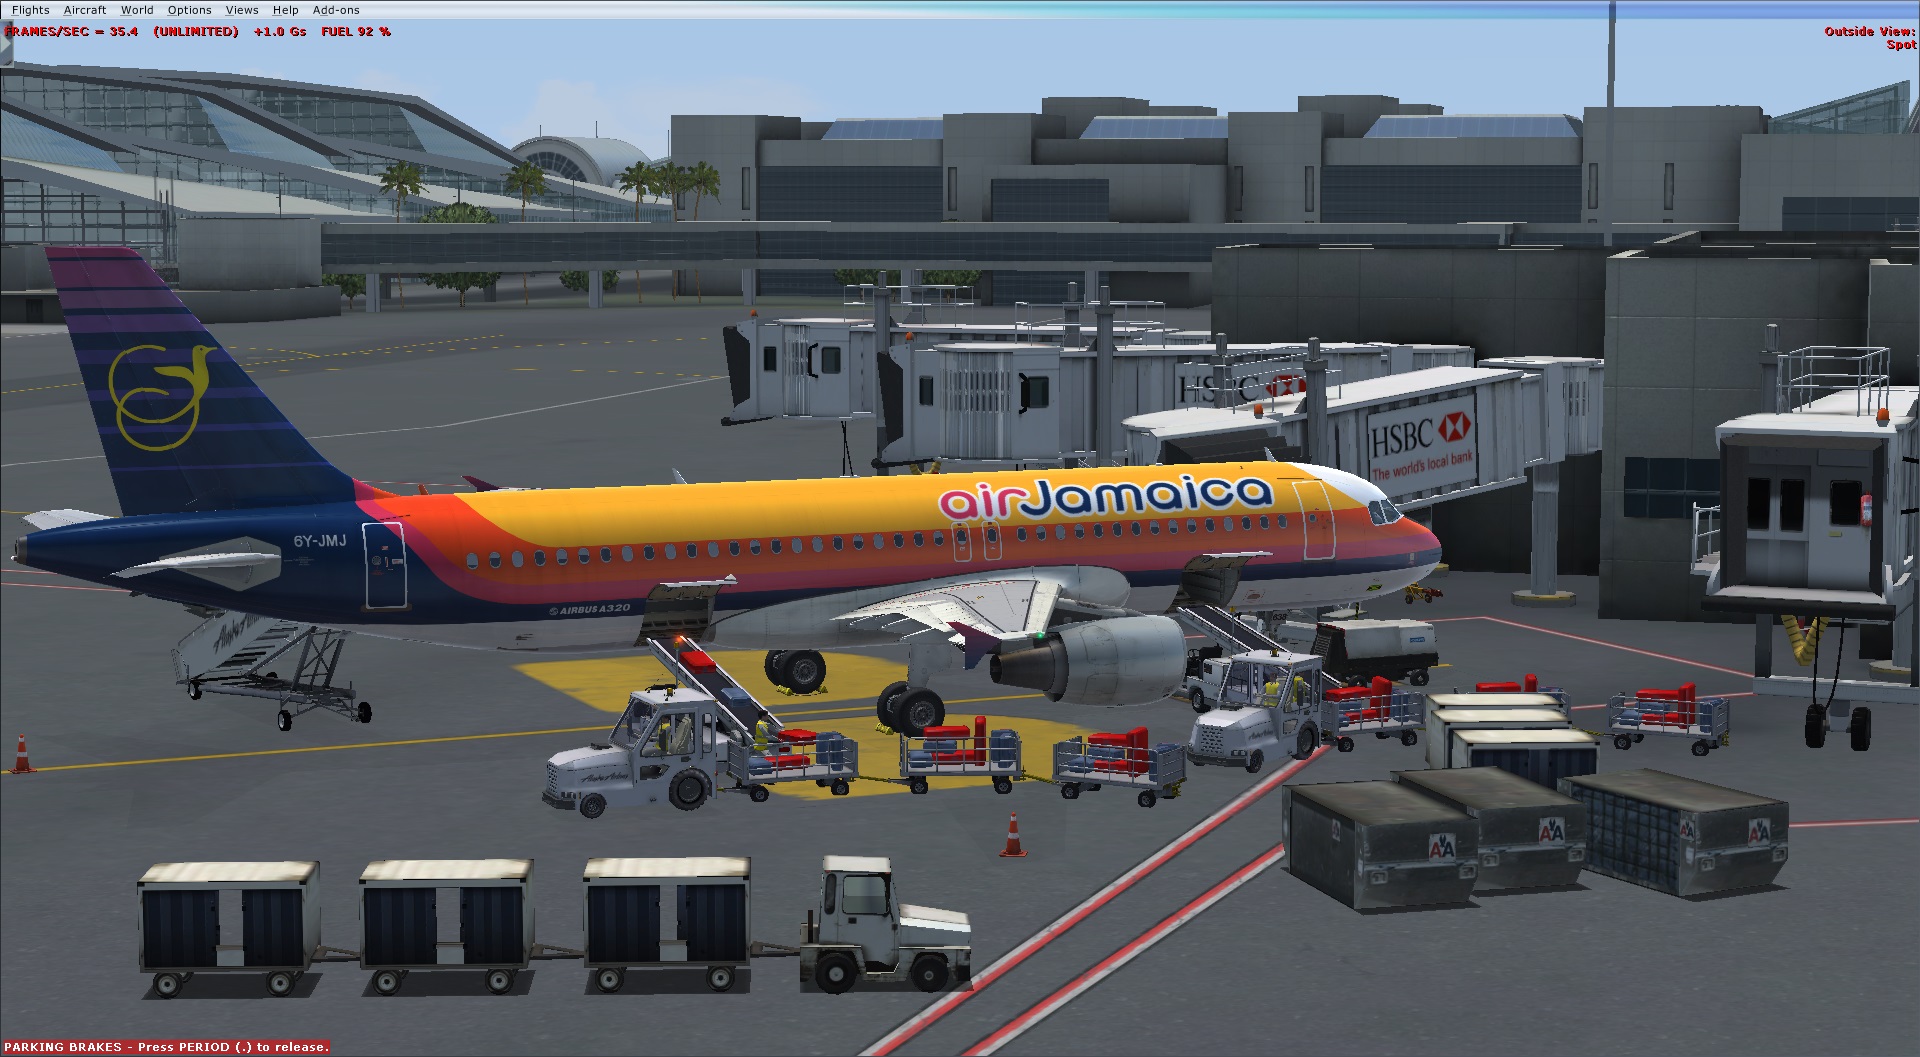 AirJamaica Flight loading up at KLAX for the long journey back to Montego Bay Jamaica 26/06/16.